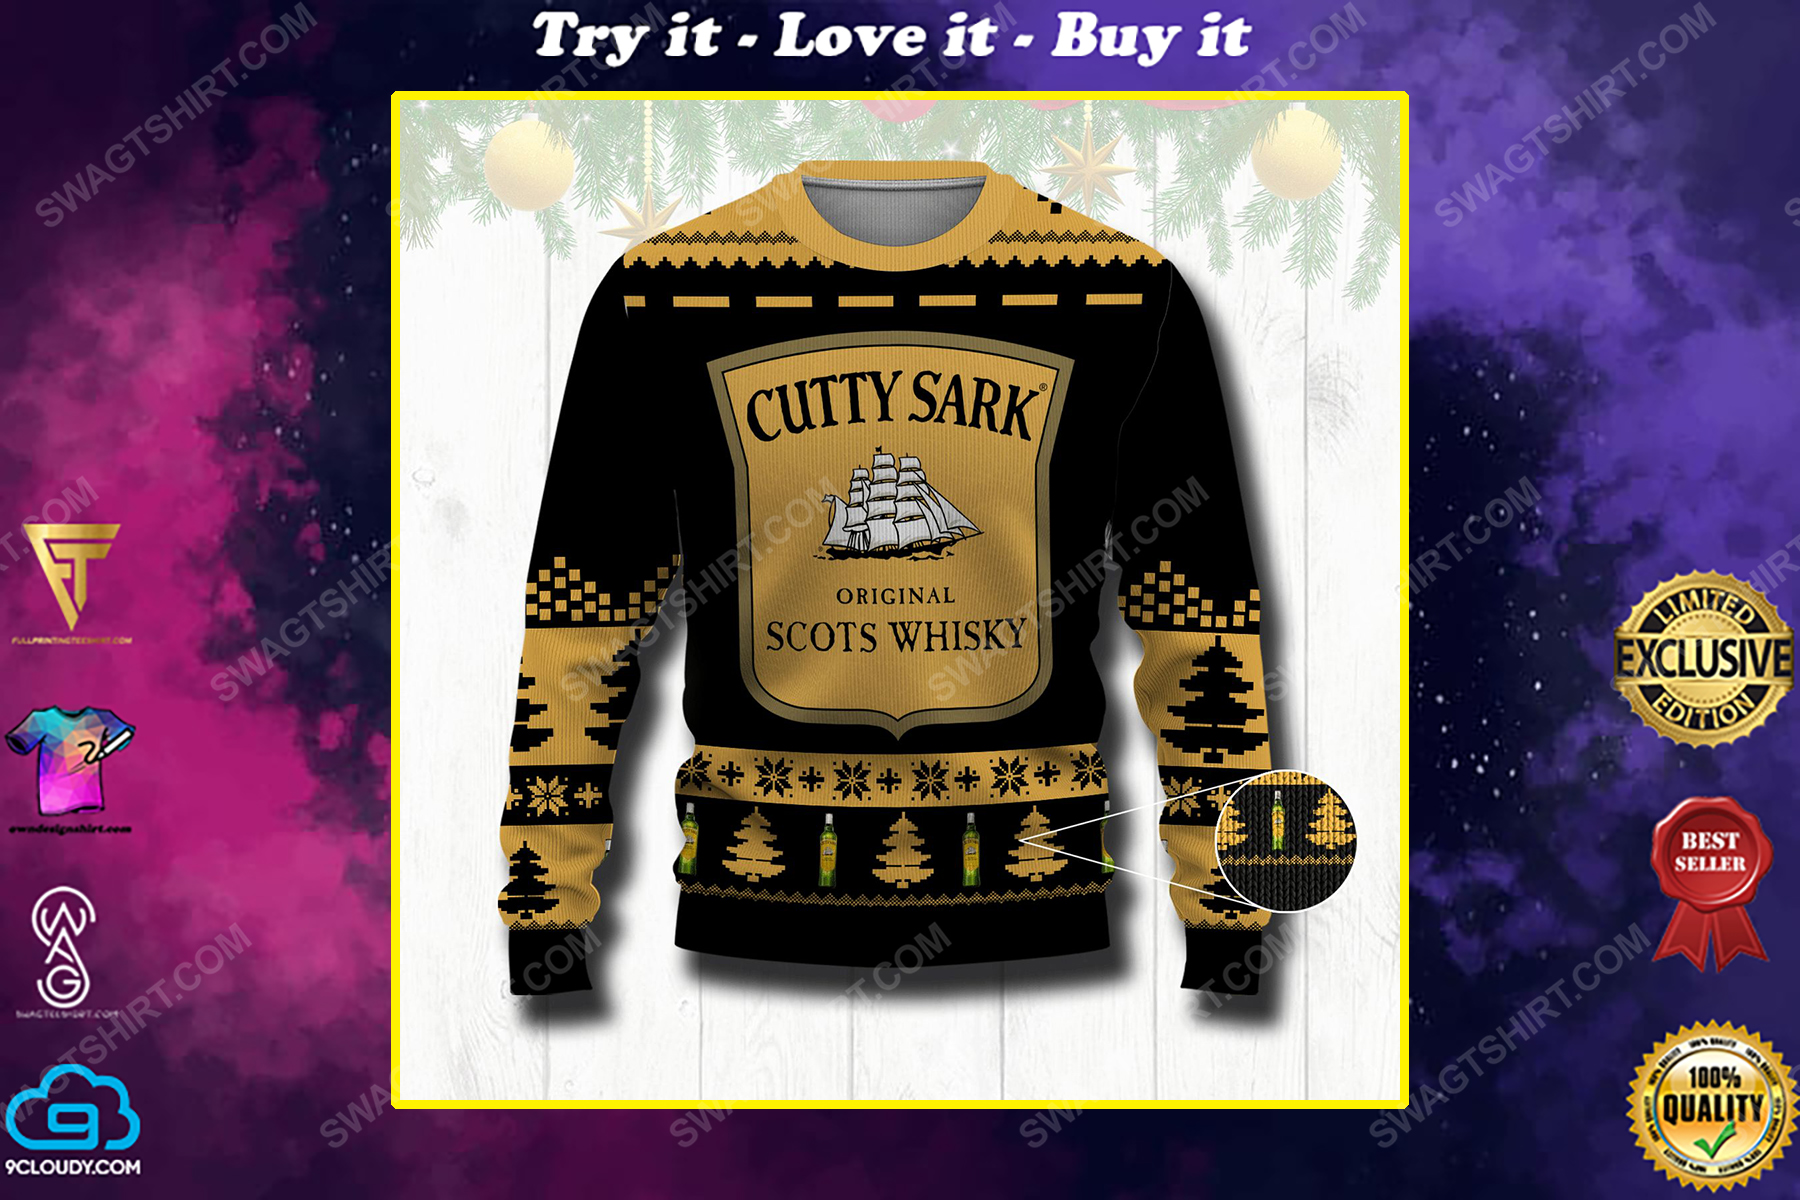 Cutty sark original scots whisky ugly christmas sweater